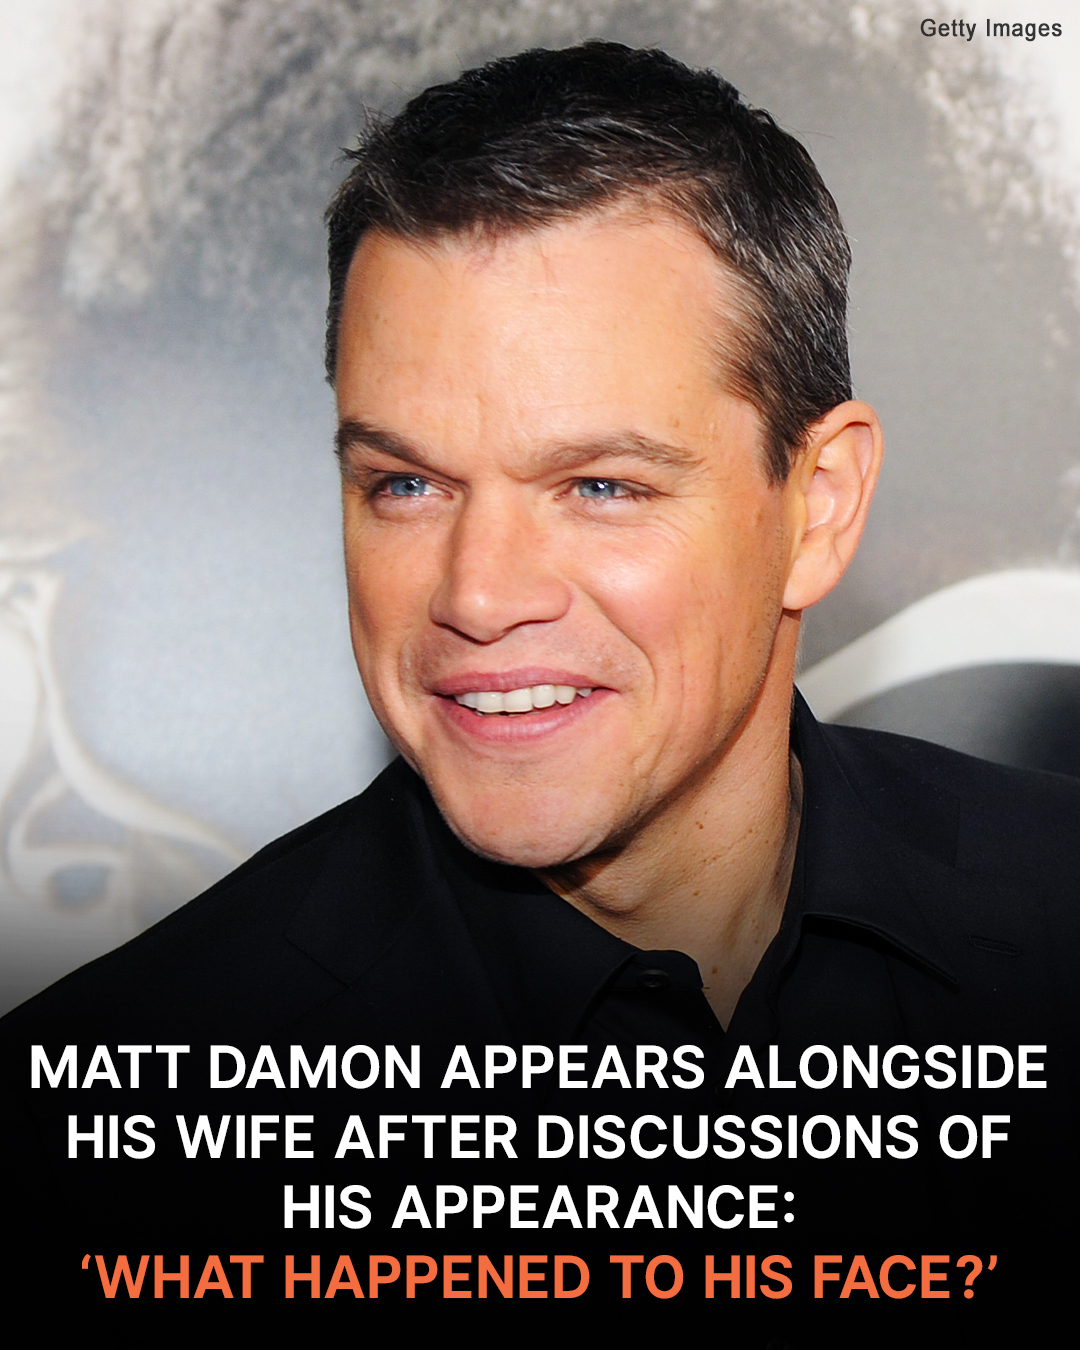 Matt Damon Appears Alongside His Wife Of 17 Years Who Supported Him When He ‘fell Into